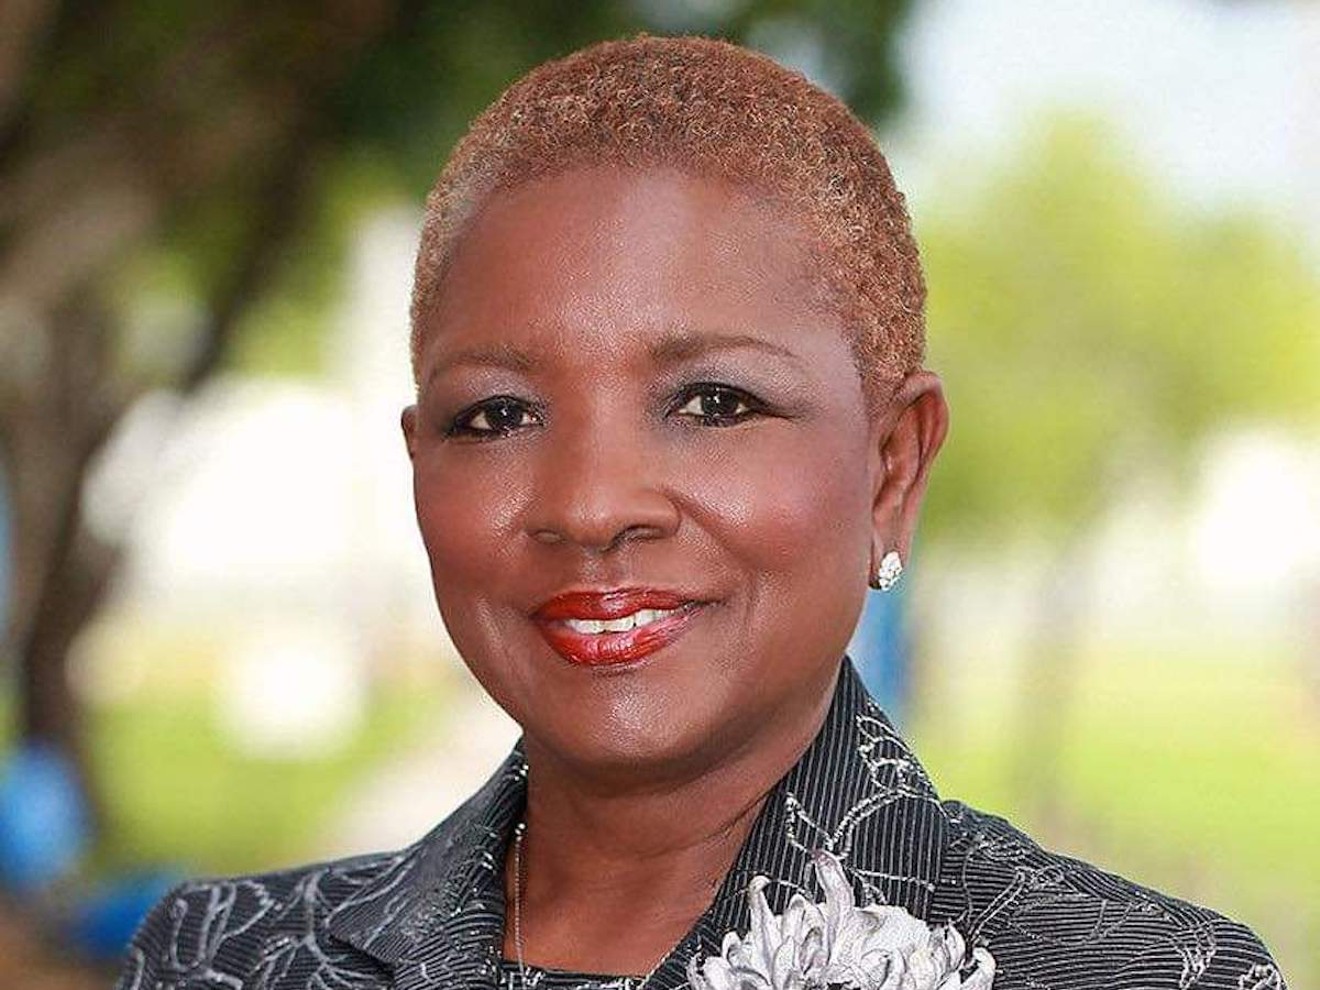 Shirley Gibson led the charge to incorporate the City of Miami Gardens, becoming its first mayor in 2003.